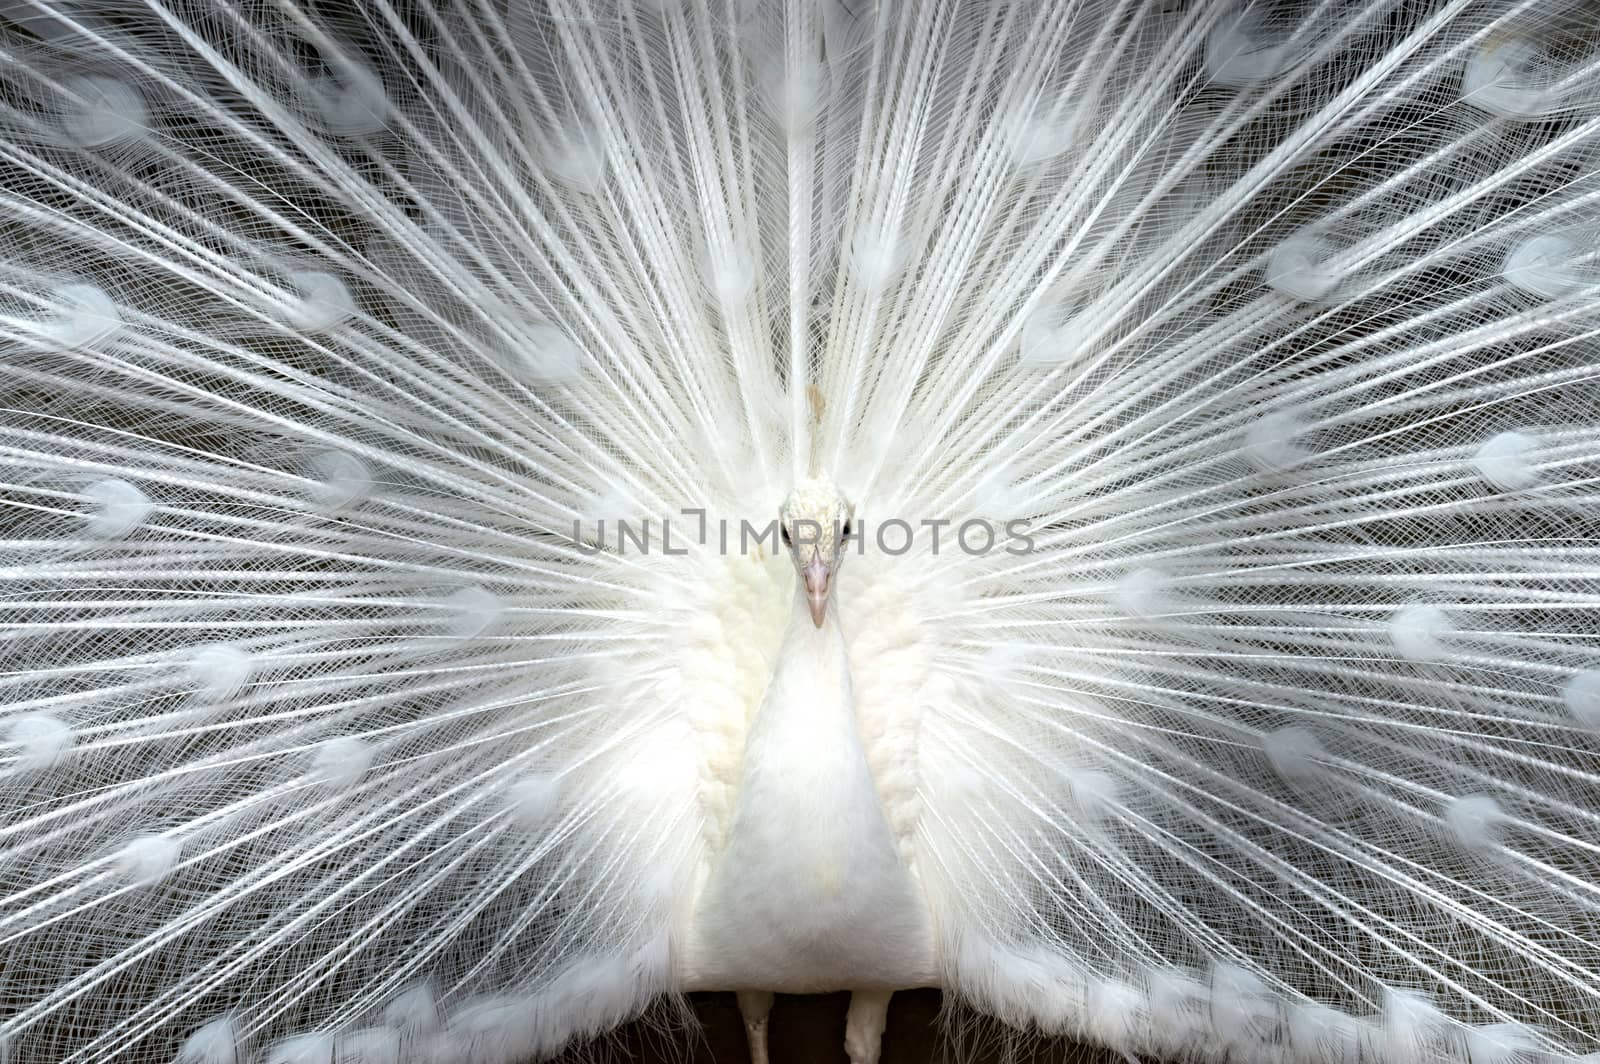 white peacock shows its tail close-up